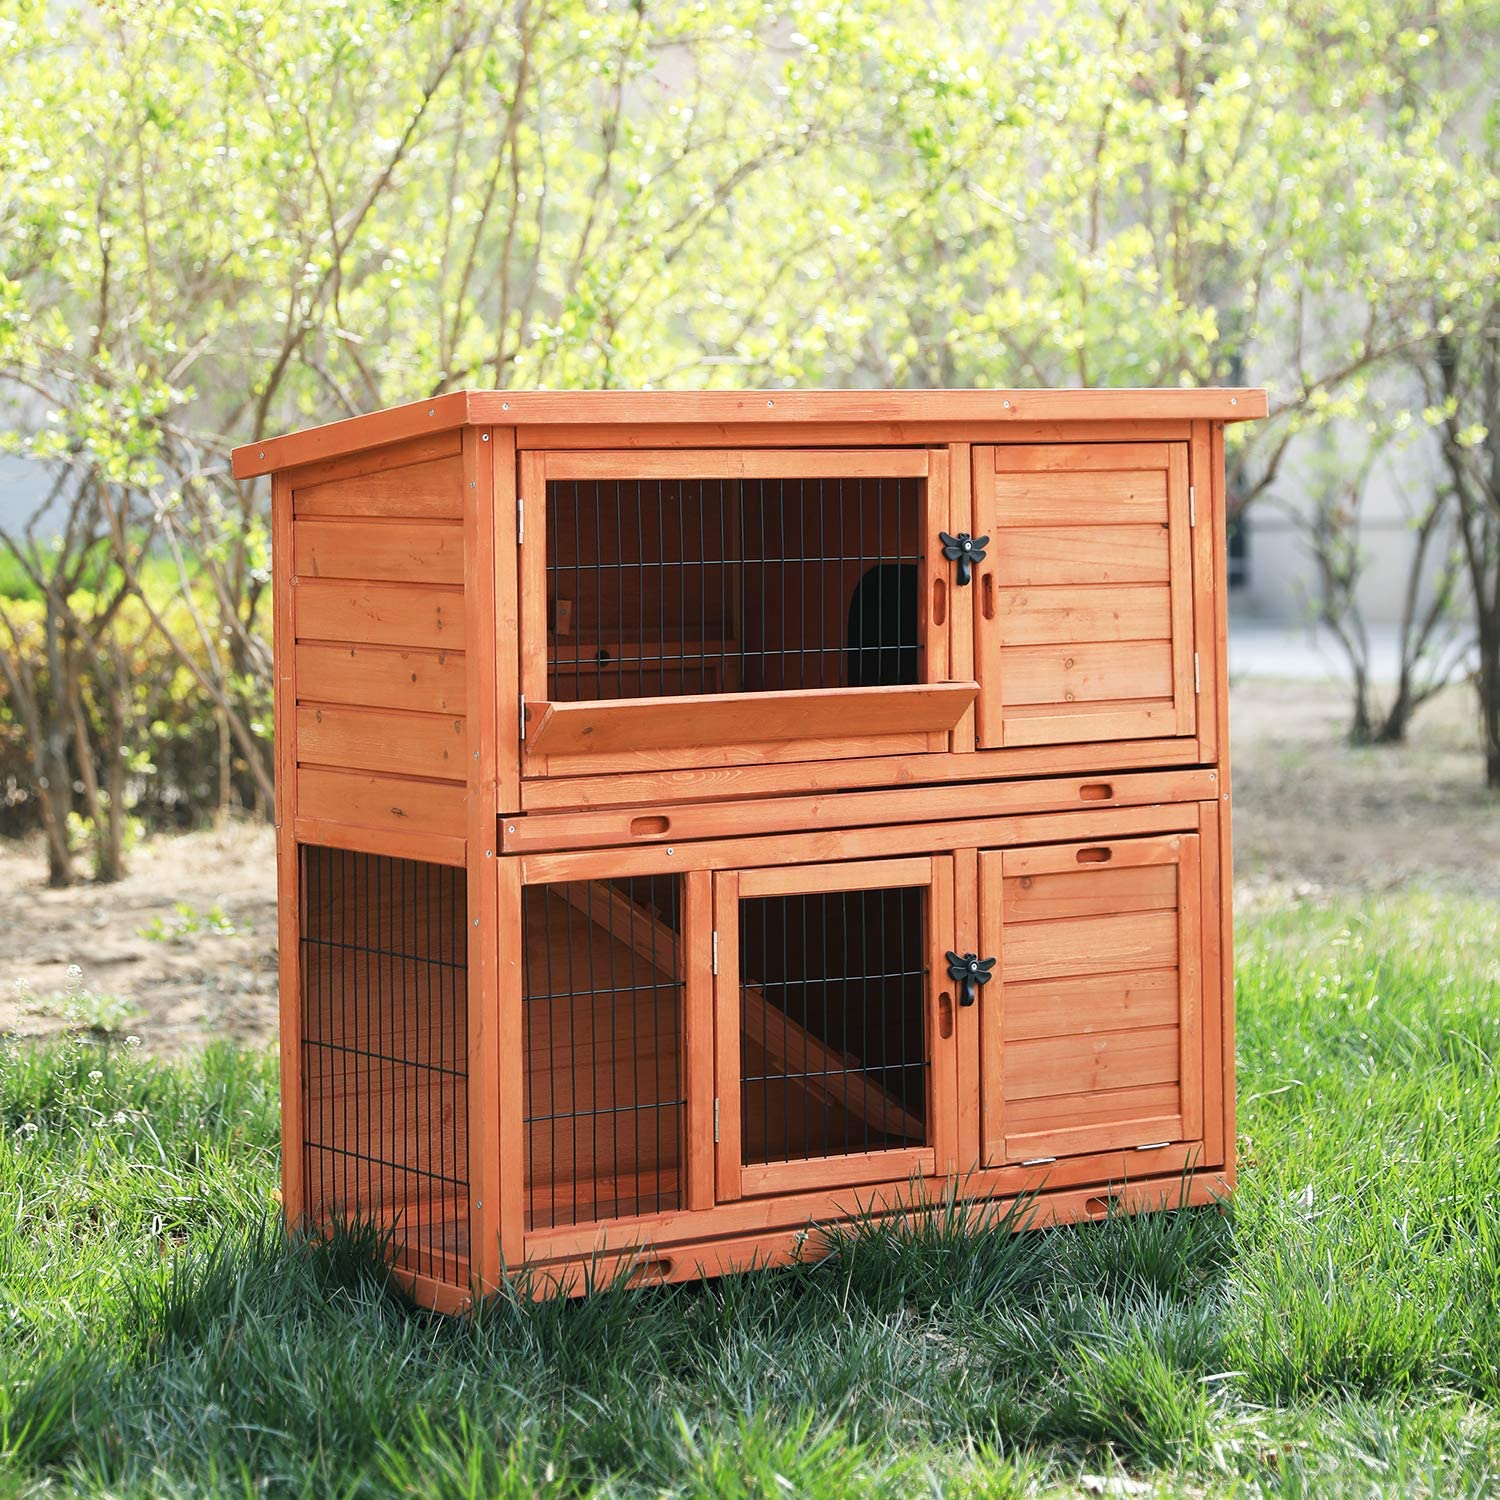 LAZY BUDDY Rabbit Hutch Wooden Rabbit Cage Indoor Outdoor Backyard Bunny Small Animal Cage with Waterproof Roof & Removable Tray - image 5 of 7